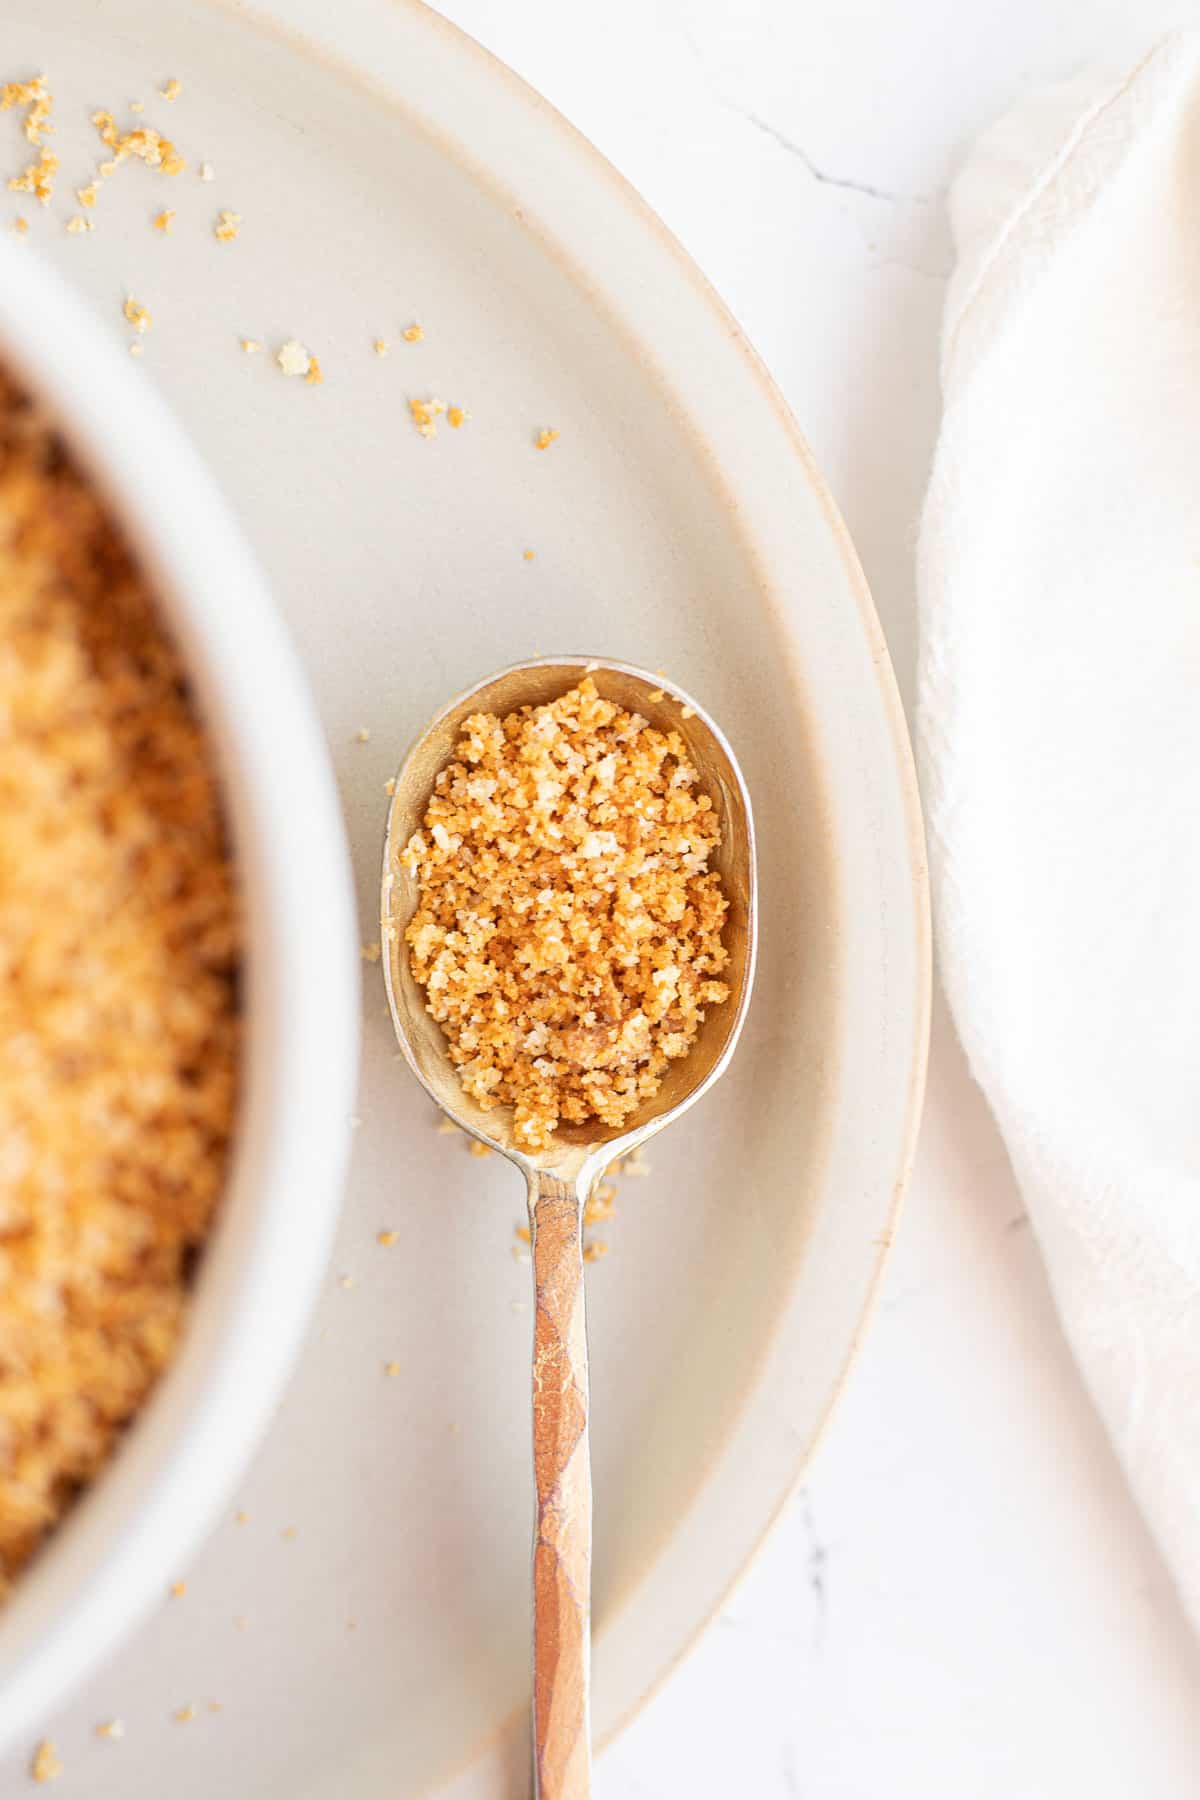 a gold spoon with gluten free bread crumbs on a tan plate.